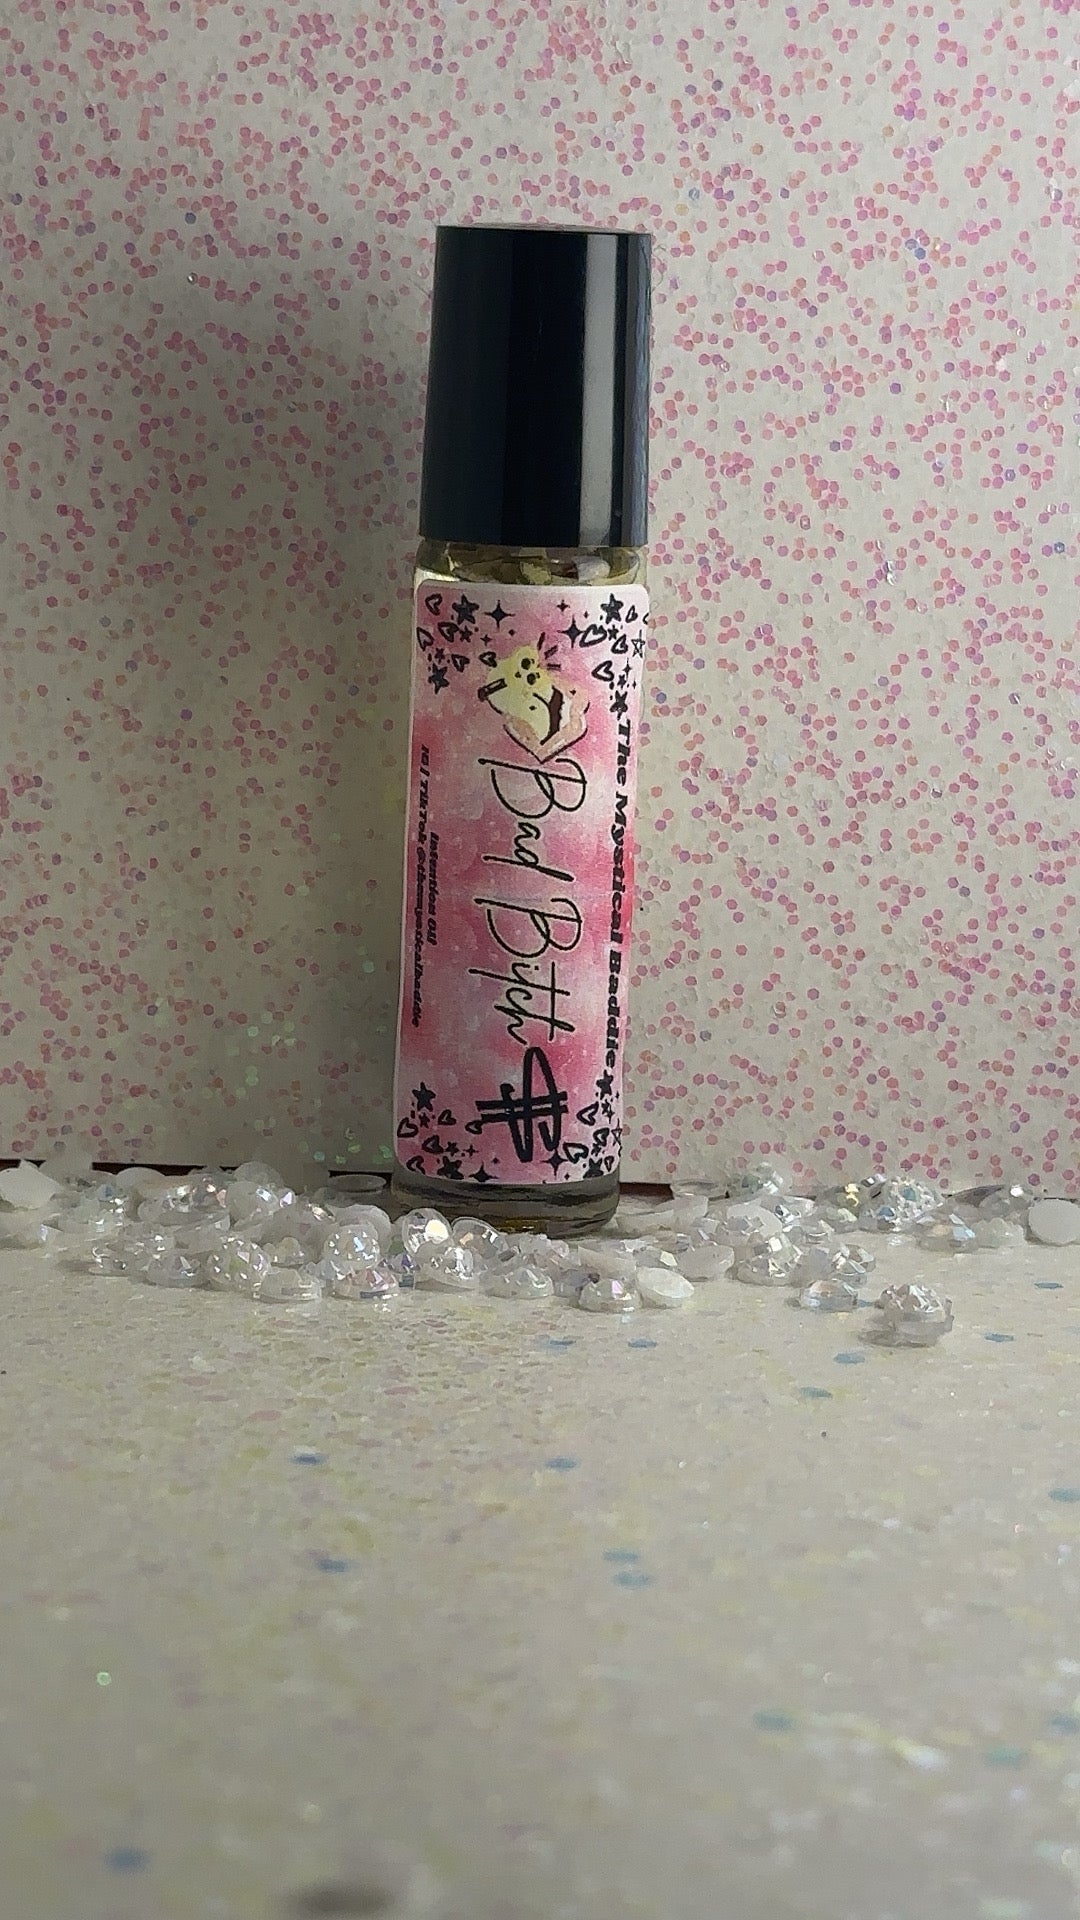 Bad B*tch Intention Oil for Confidence, Power, Strength, Influence & Success